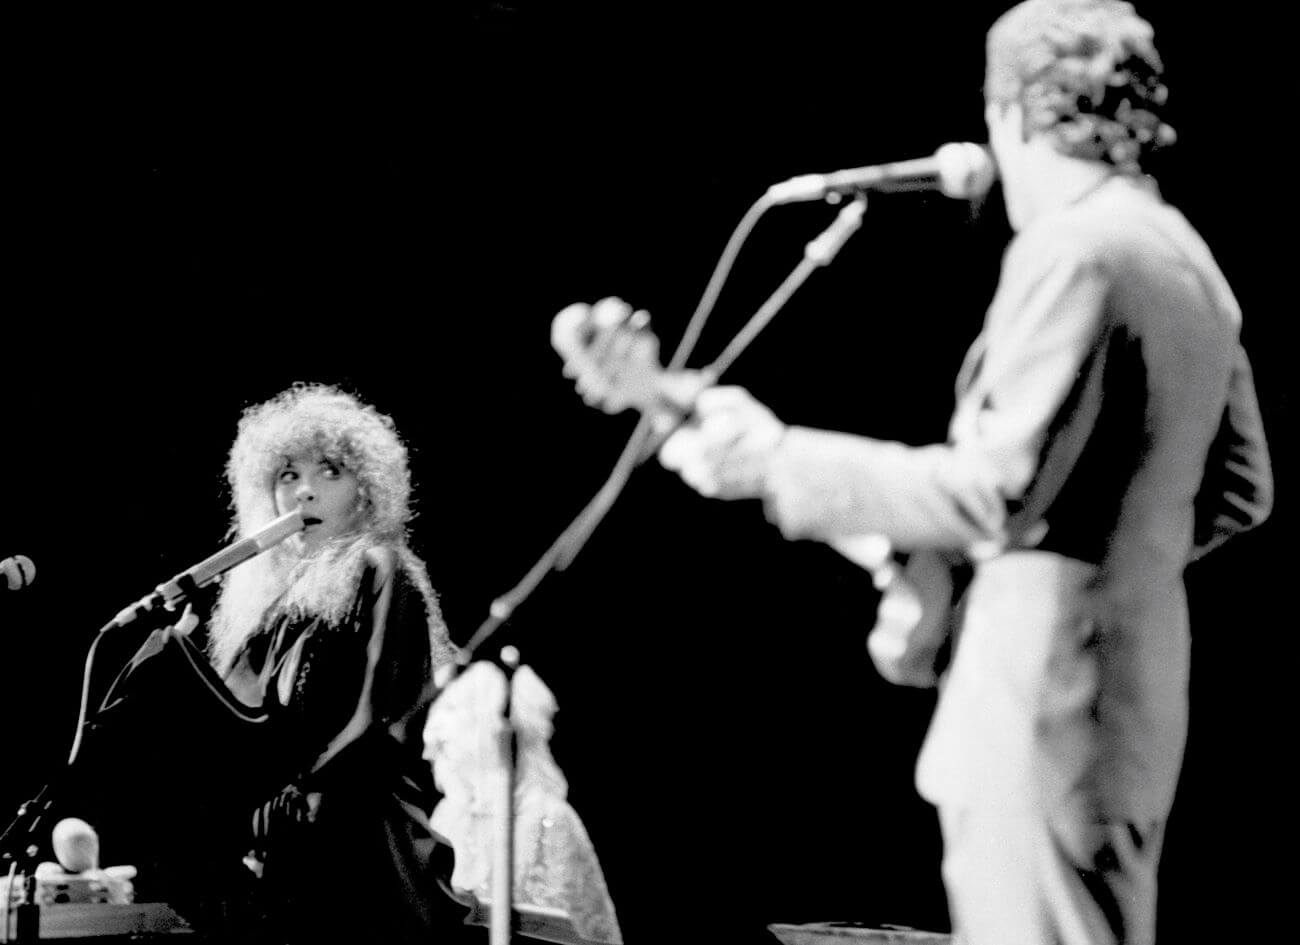 A black and white picture of Stevie Nicks looking at Lindsey Buckingham while she sings. Buckingham plays guitar.